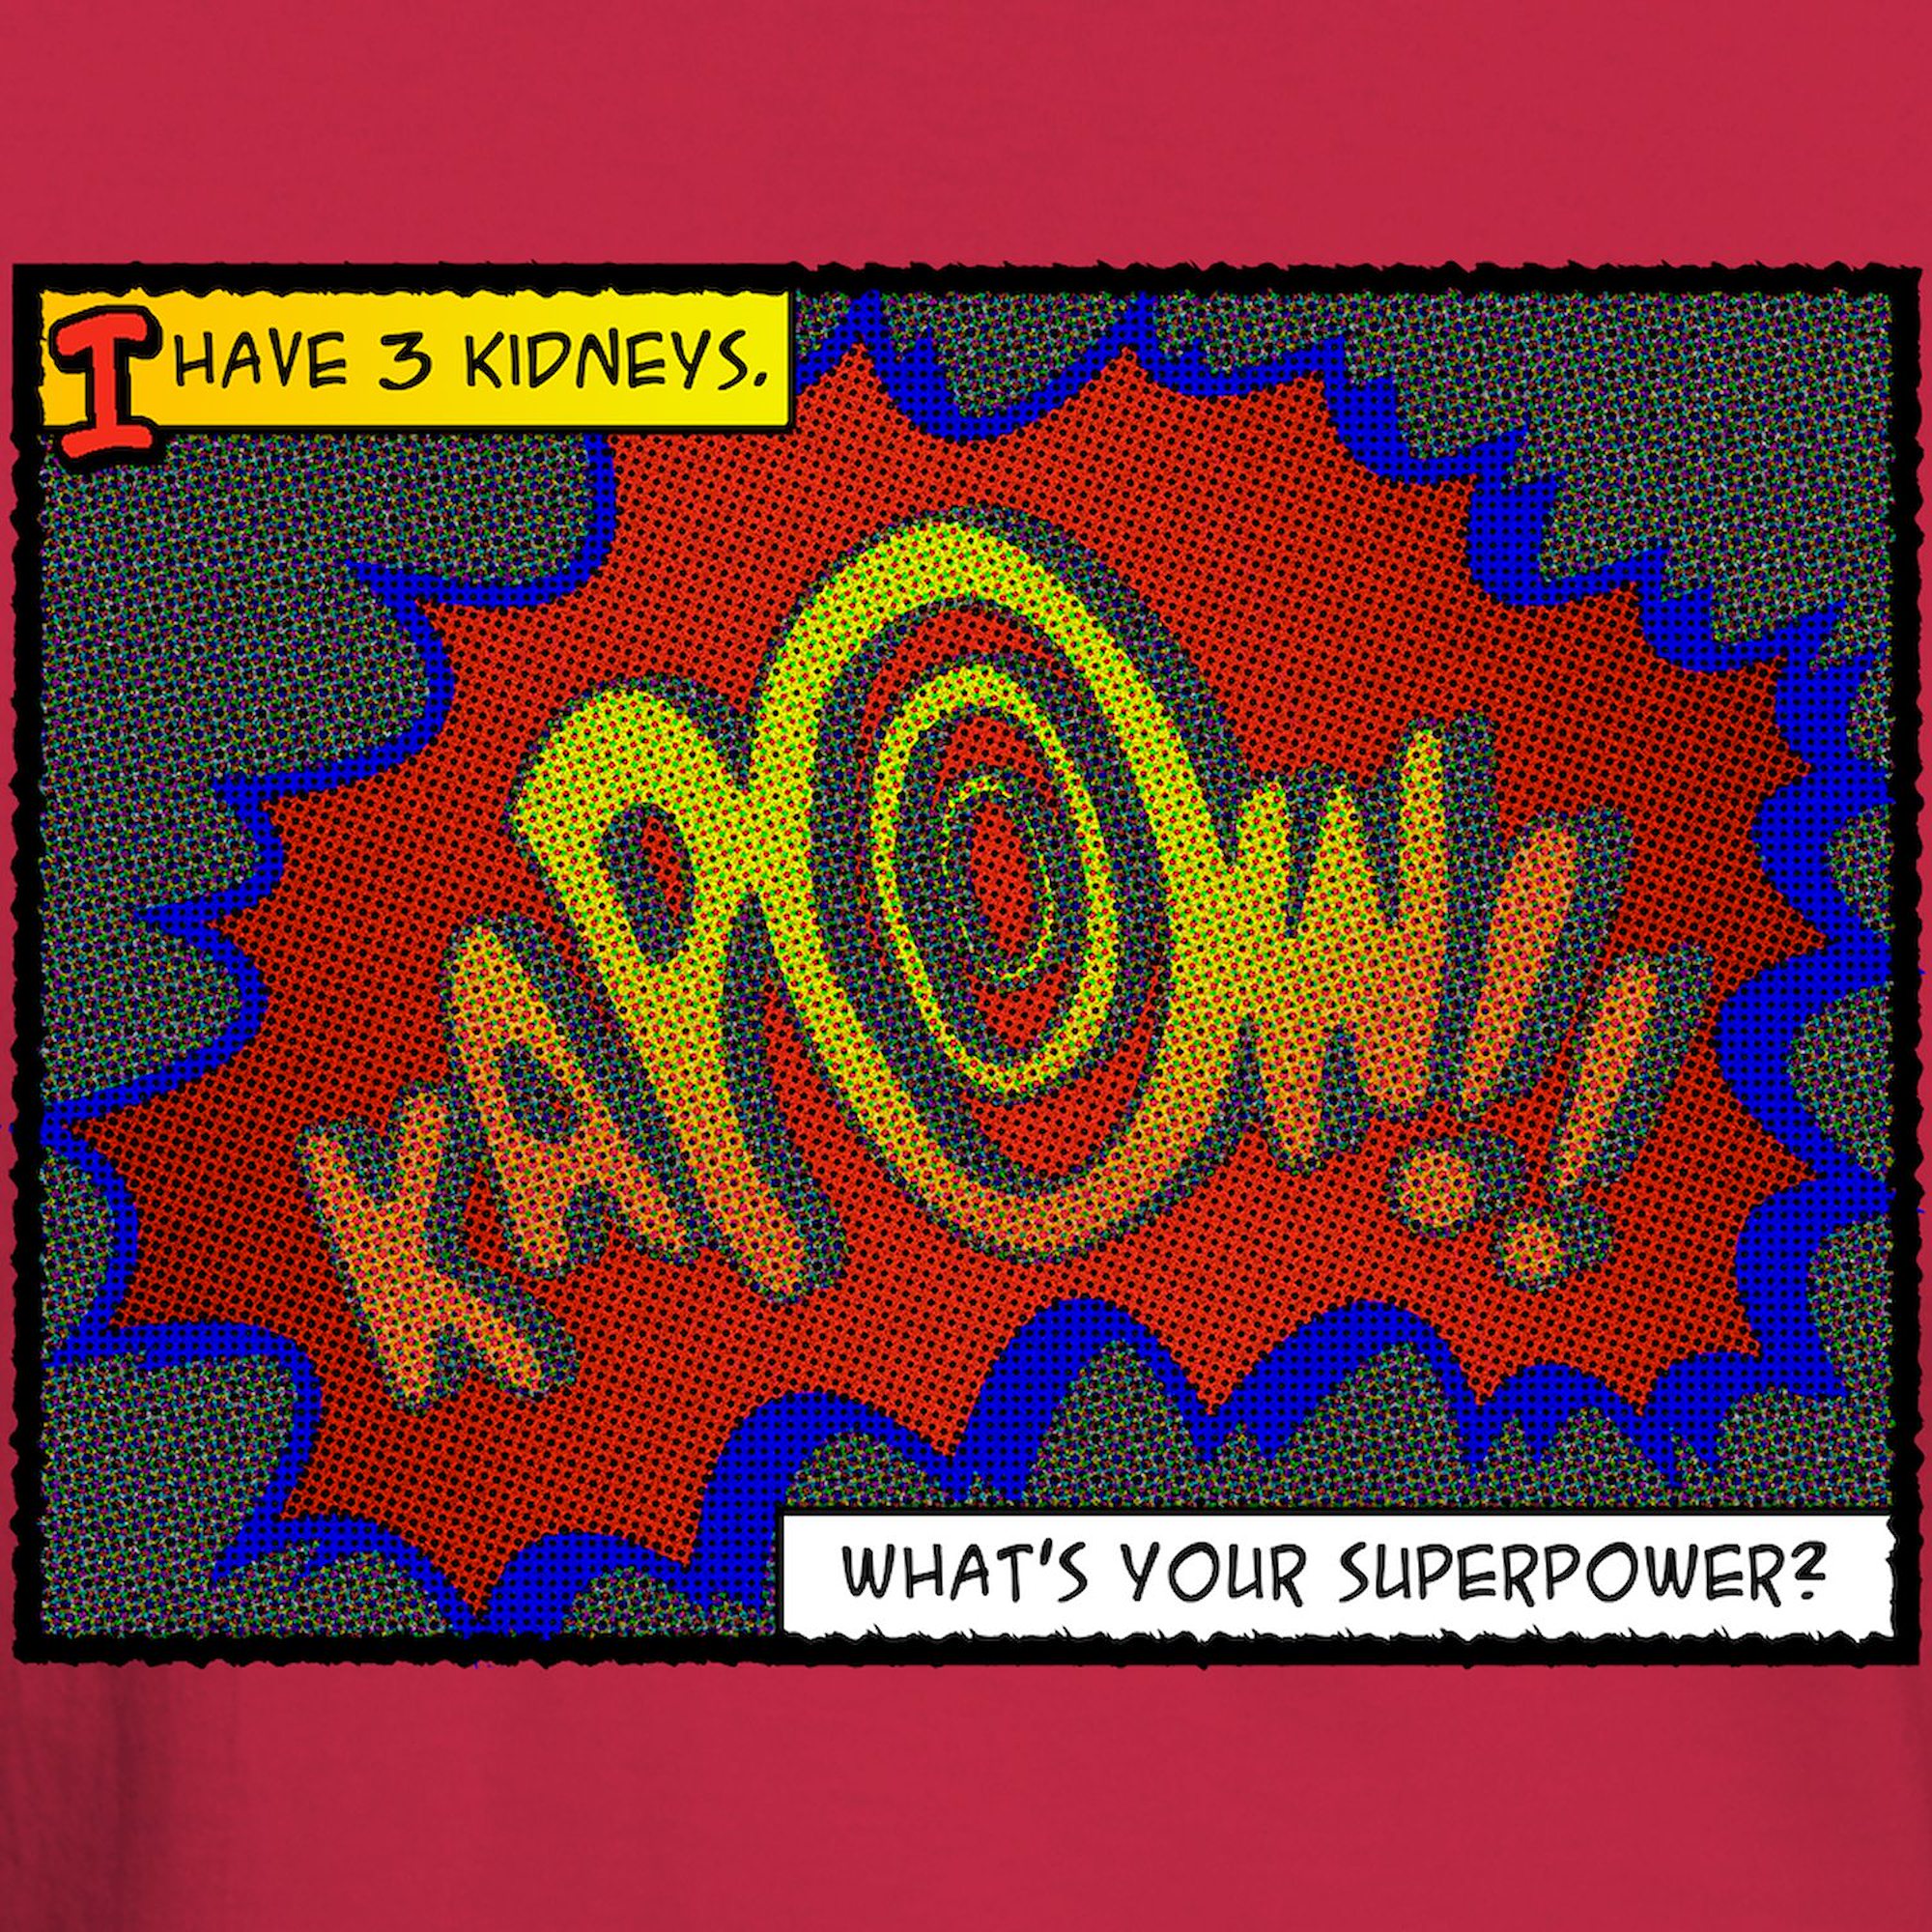 CafePress - I Have 3 Kidneys. Whats Your Superpower? T Shirt - 100% Cotton T-Shirt - image 3 of 4